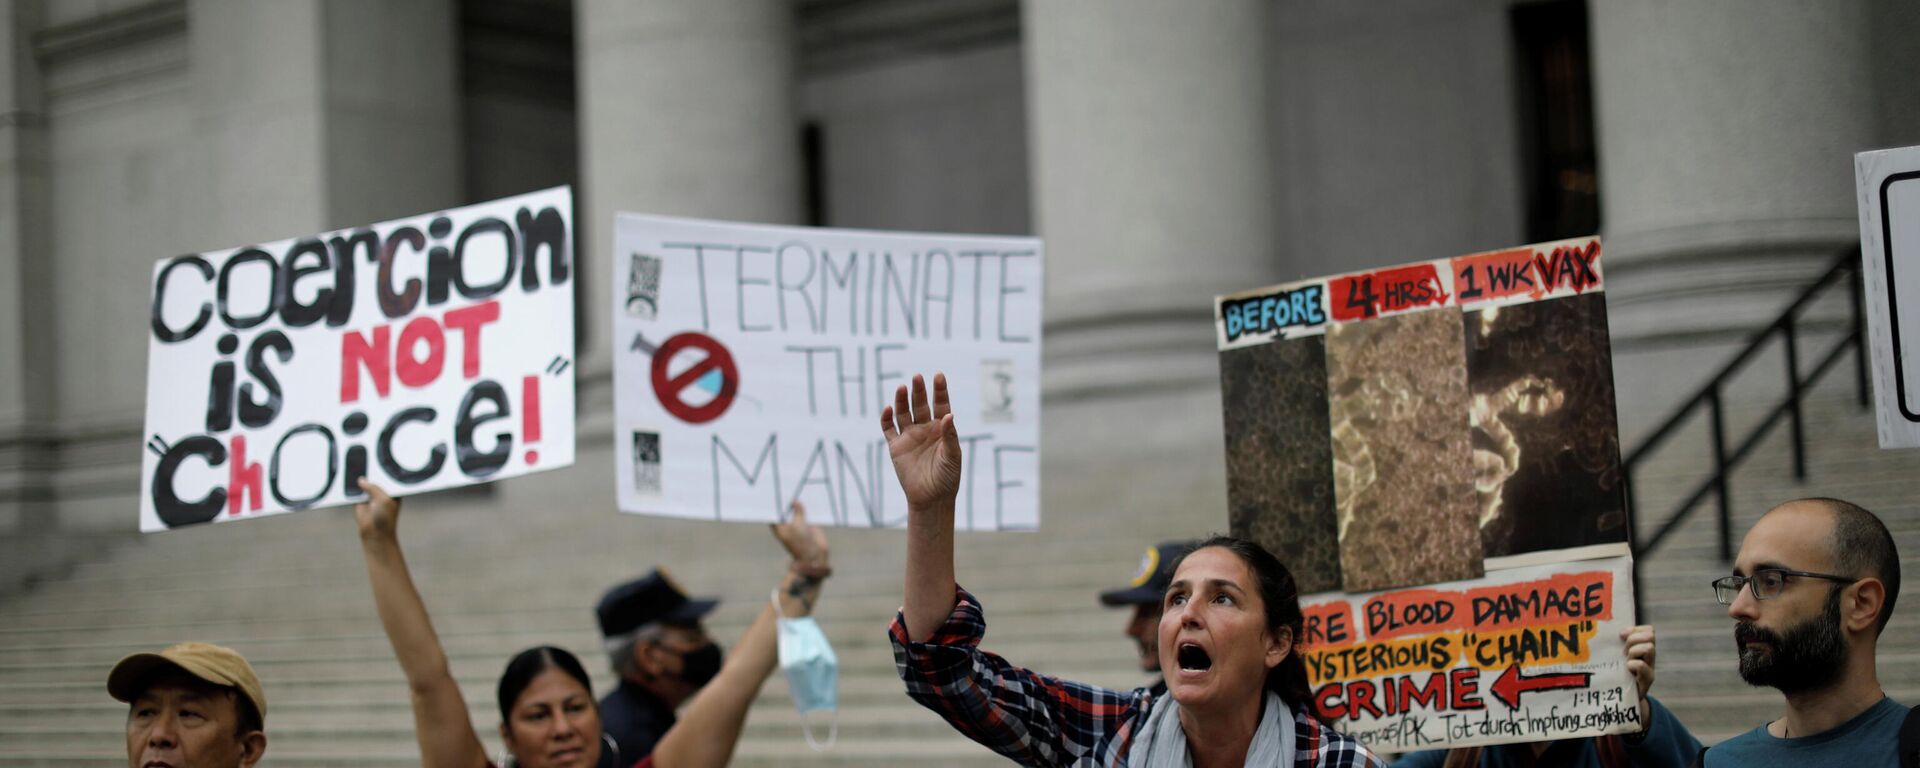 A woman screams as people and teachers protest against New York City mandated vaccines against the coronavirus disease (COVID-19) in front of the United States Court in Manhattan in New York City, New York, U.S., October 12, 2021. REUTERS/Mike Segar - Sputnik International, 1920, 12.10.2021